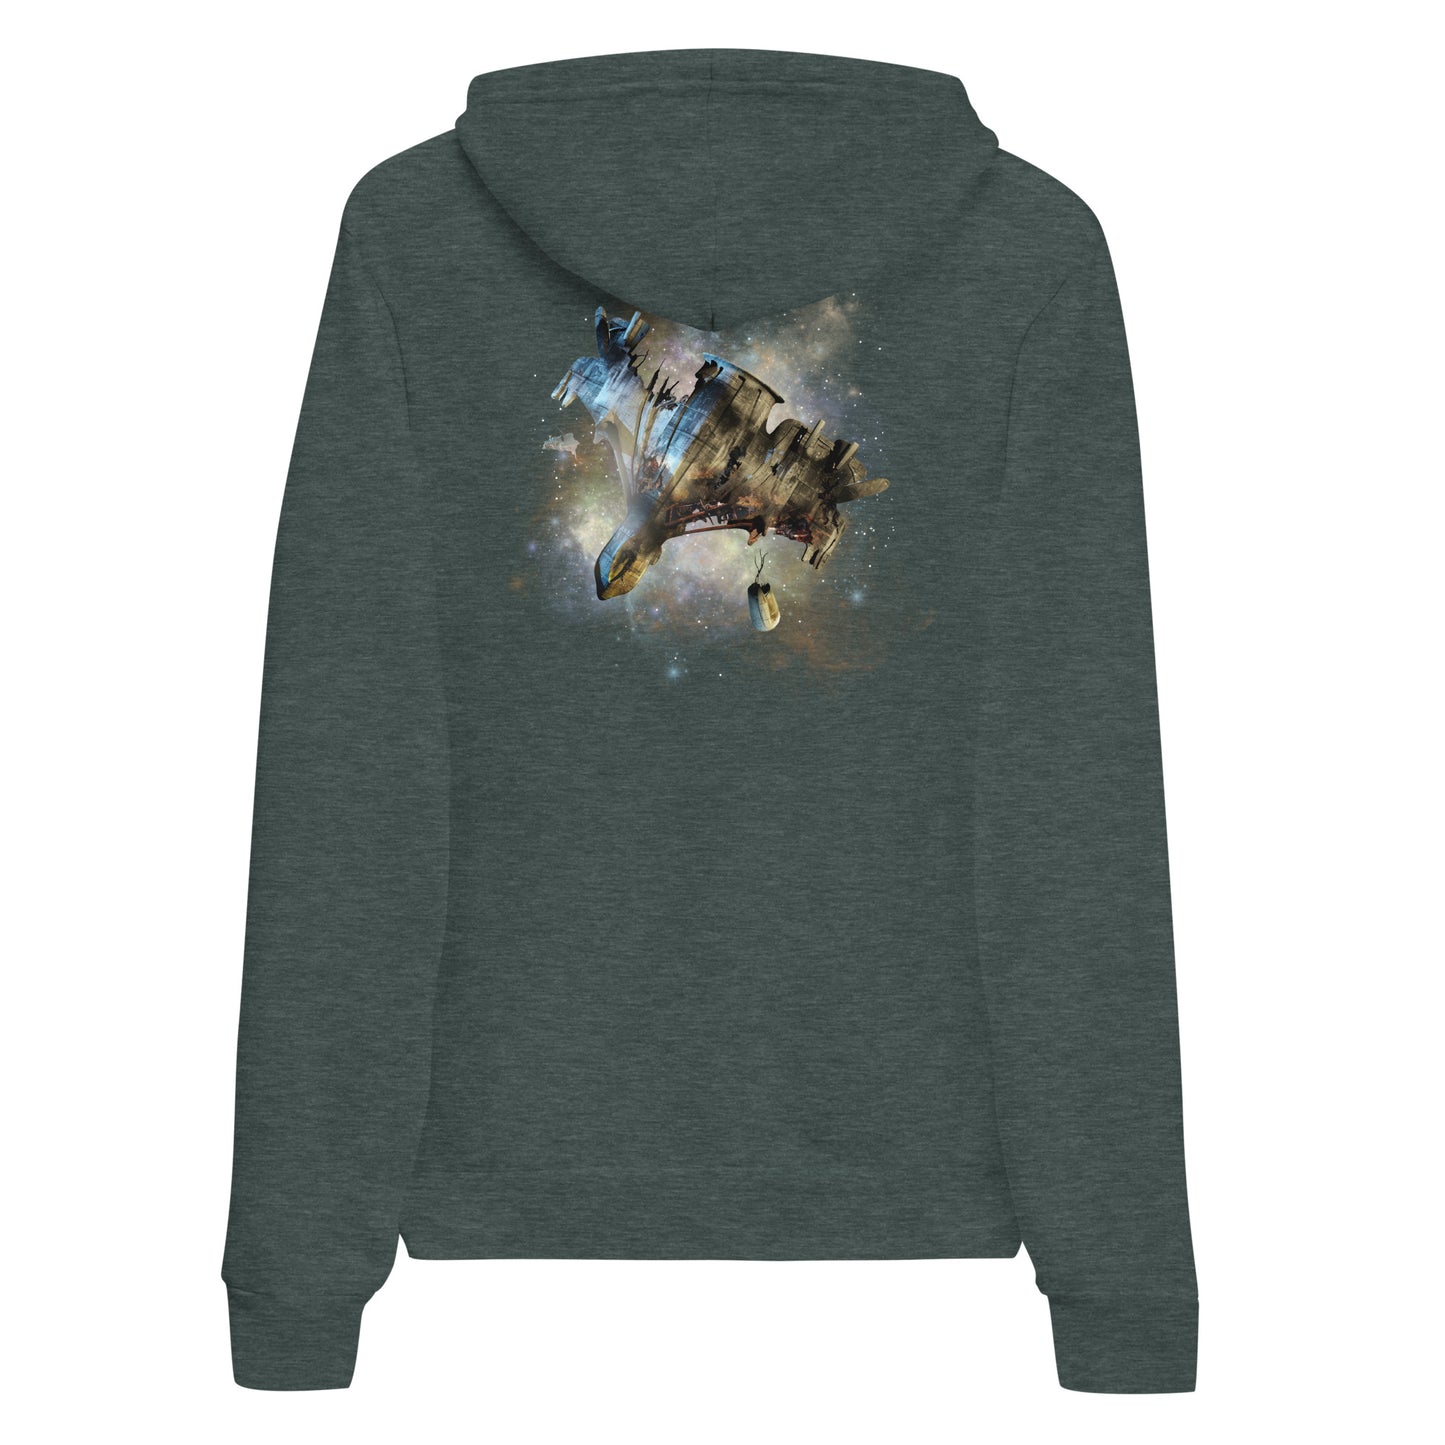 DIVING CREW & Spaceship Wreck Hoodie - The Diving Universe by Kristine Kathryn Rusch